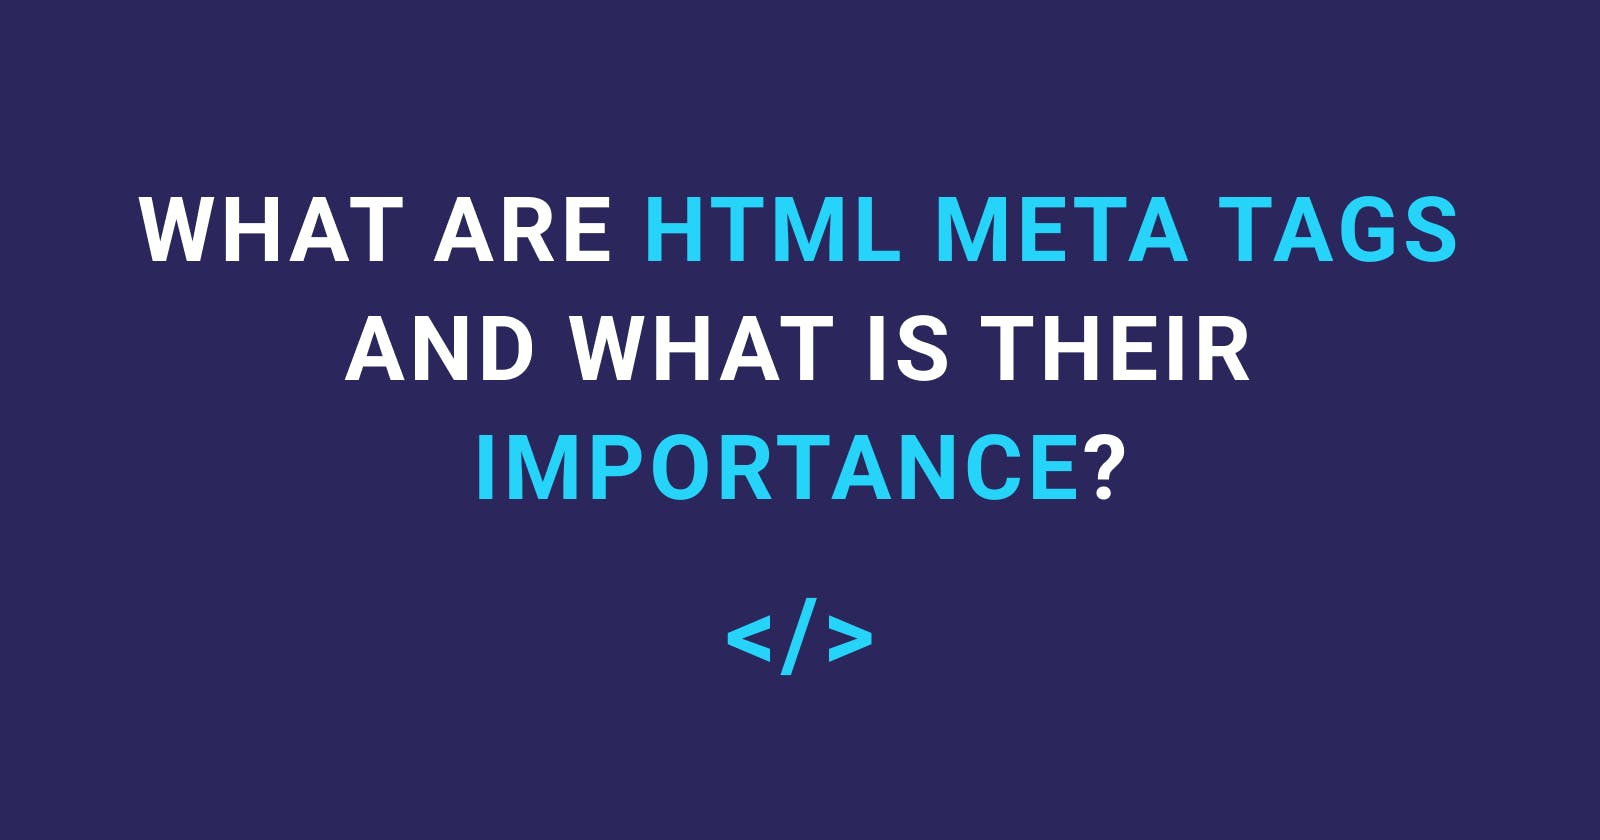 What Are HTML Meta Tags And What Is Their Importance?